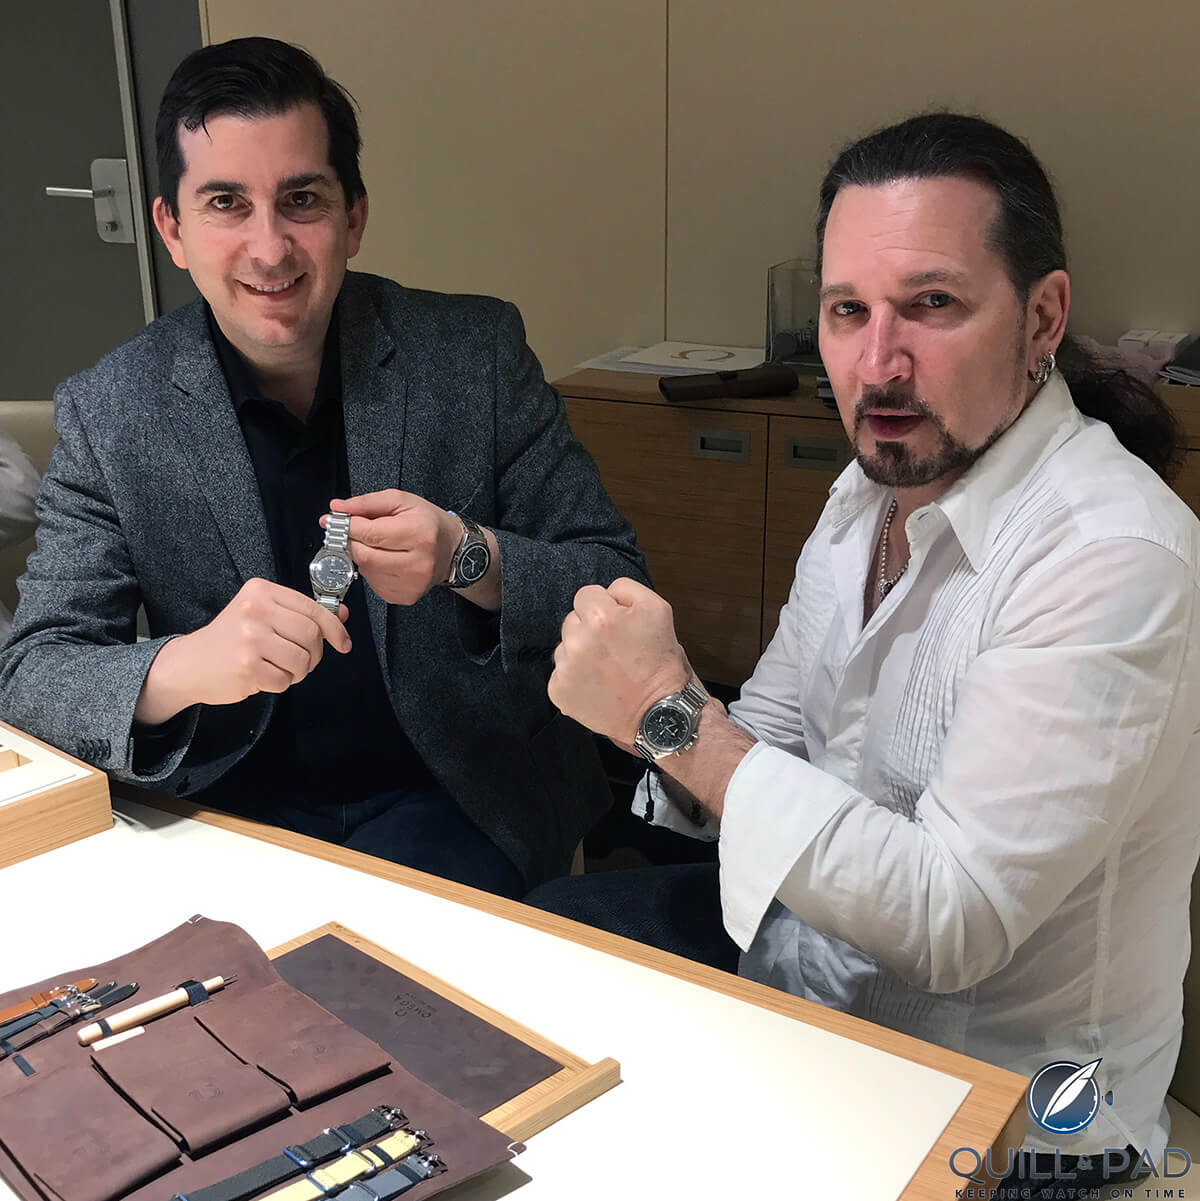 Kiss drummer Eric Singer (right) with Rob Caplan of Topper checking out watches at the Omega booth at Baselworld 2017 (photo courtesy Rob Caplan)